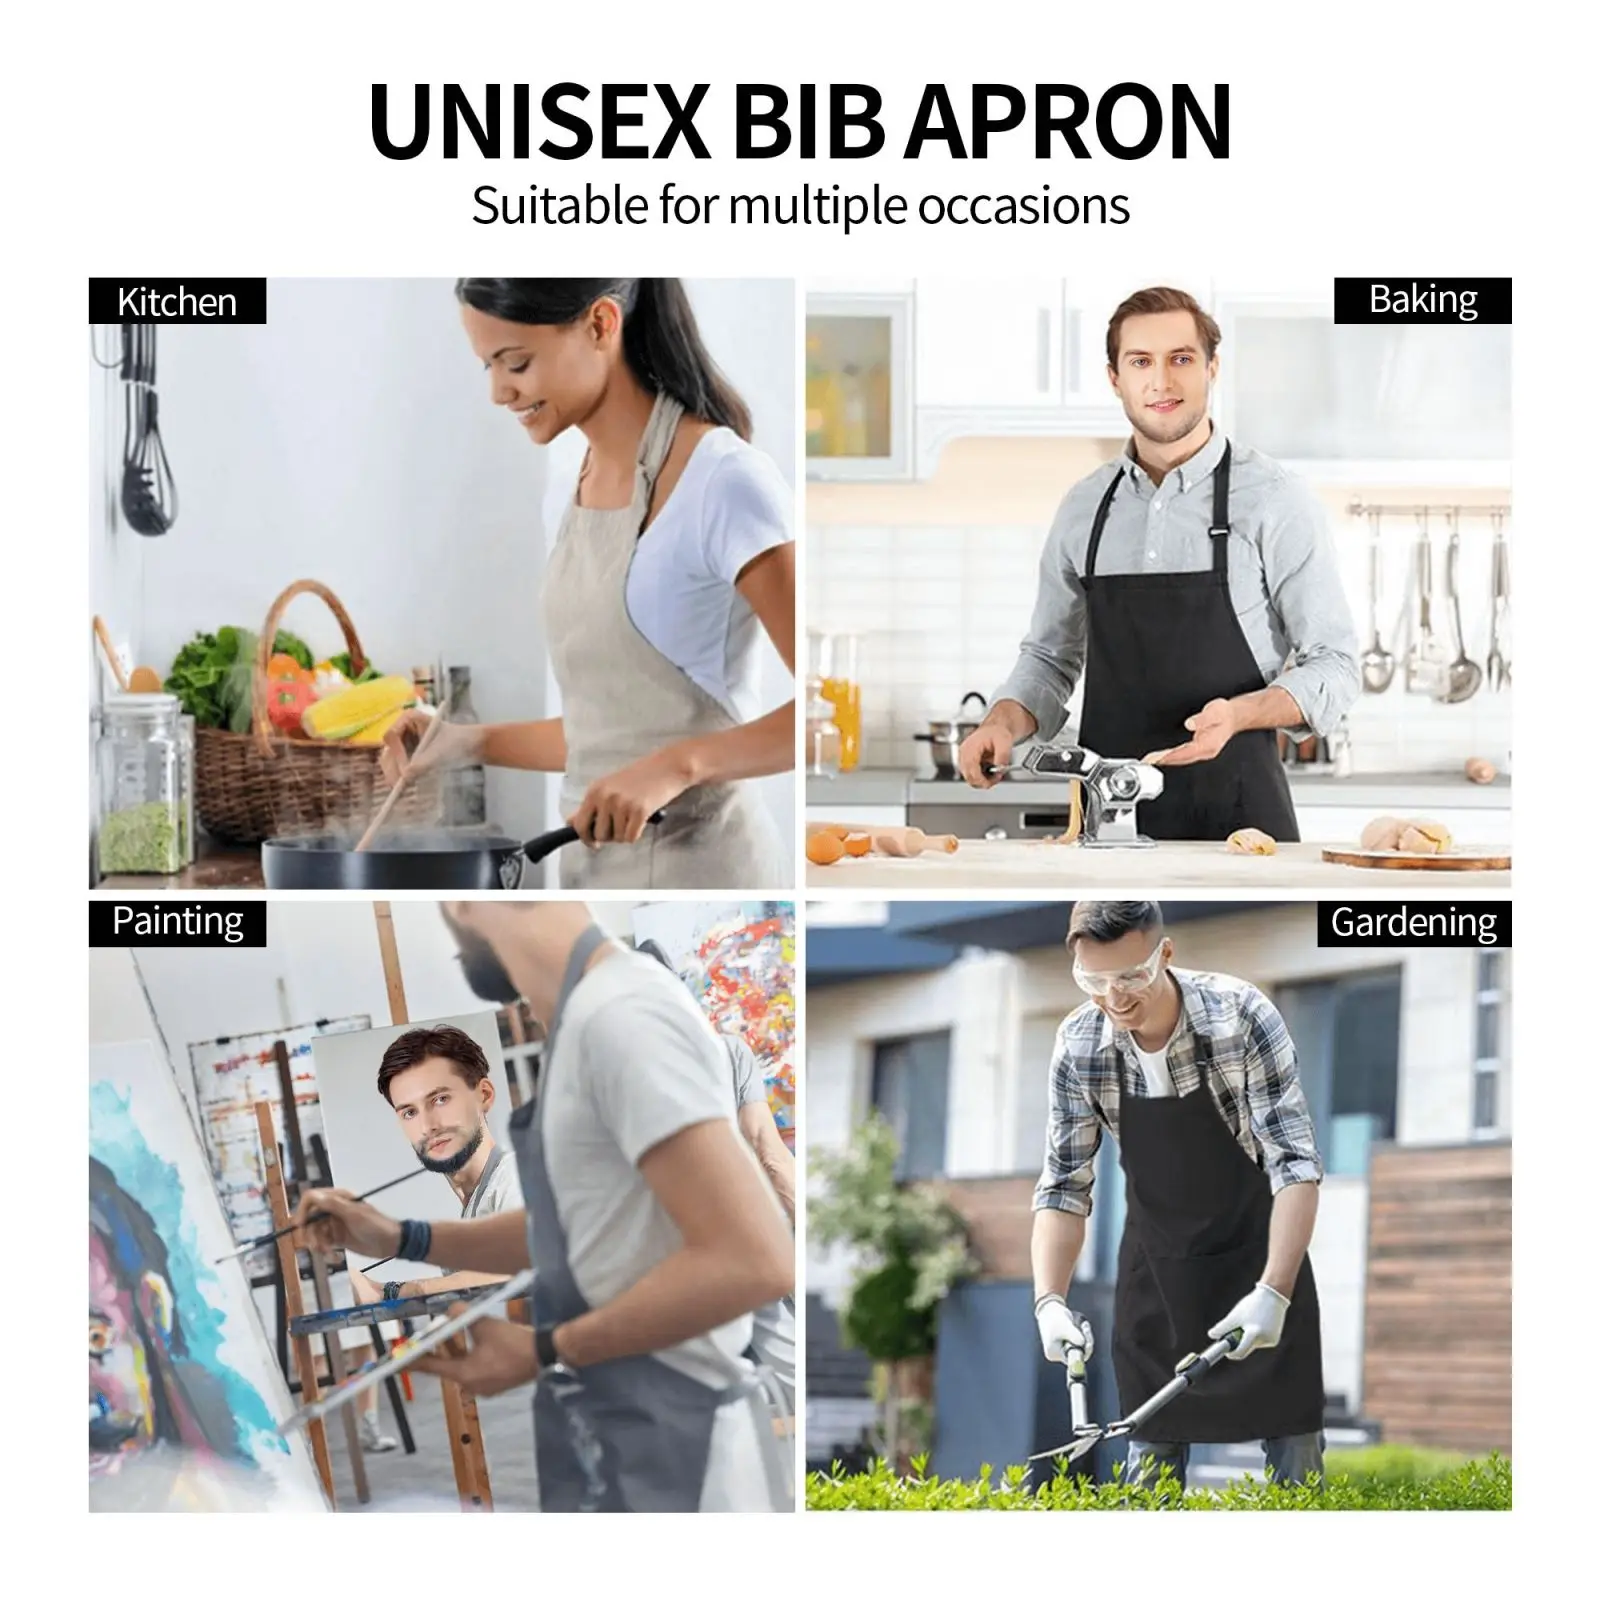 https://ae01.alicdn.com/kf/Sd174148eb8da4464b86bd47bf863b814L/Cute-Home-Work-Apron-Women-Girls-Aprons-With-Pocket-for-Wife-Mom-Grandma-Cooking-Baking-Gardening.jpg